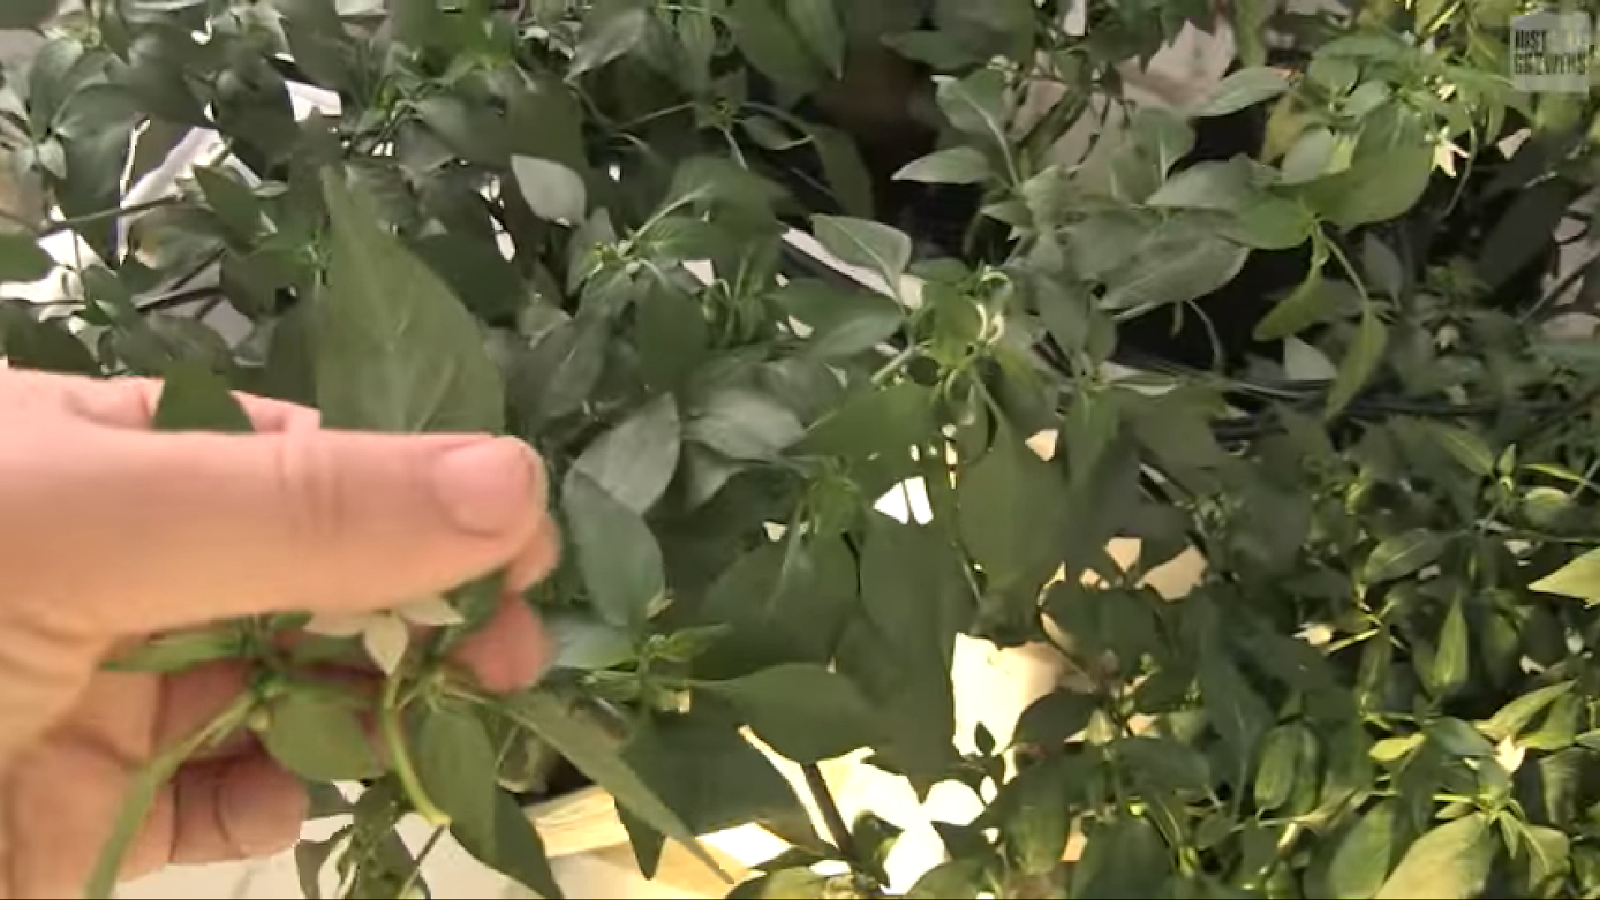 Hand inspecting leaves